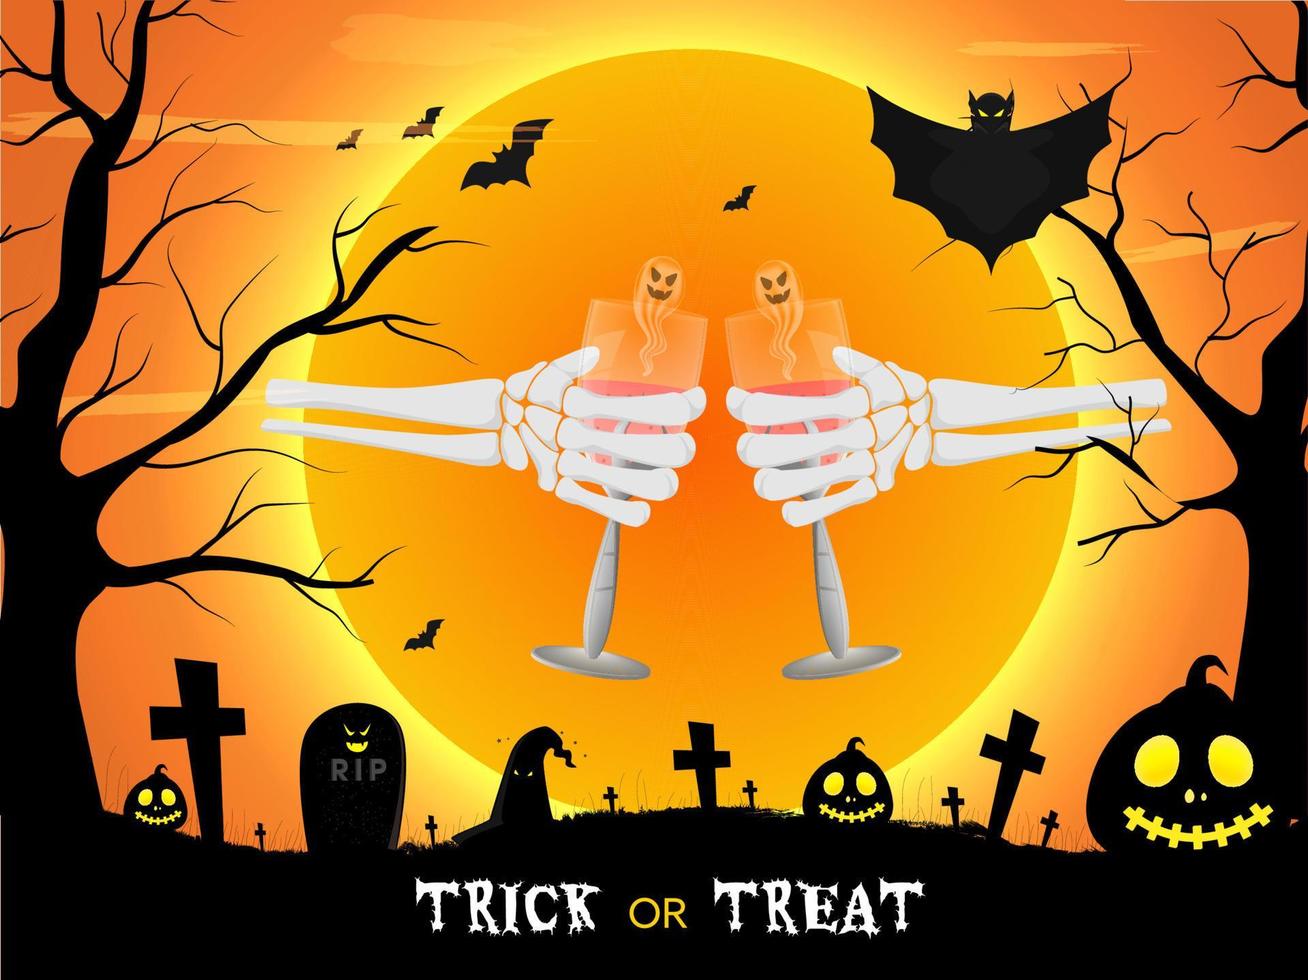 Full Moon Graveyard View Background with Bats Flying, Jack-O-Lanterns and Skeleton Hands Holding Drink Glass for Trick Or Treat. vector